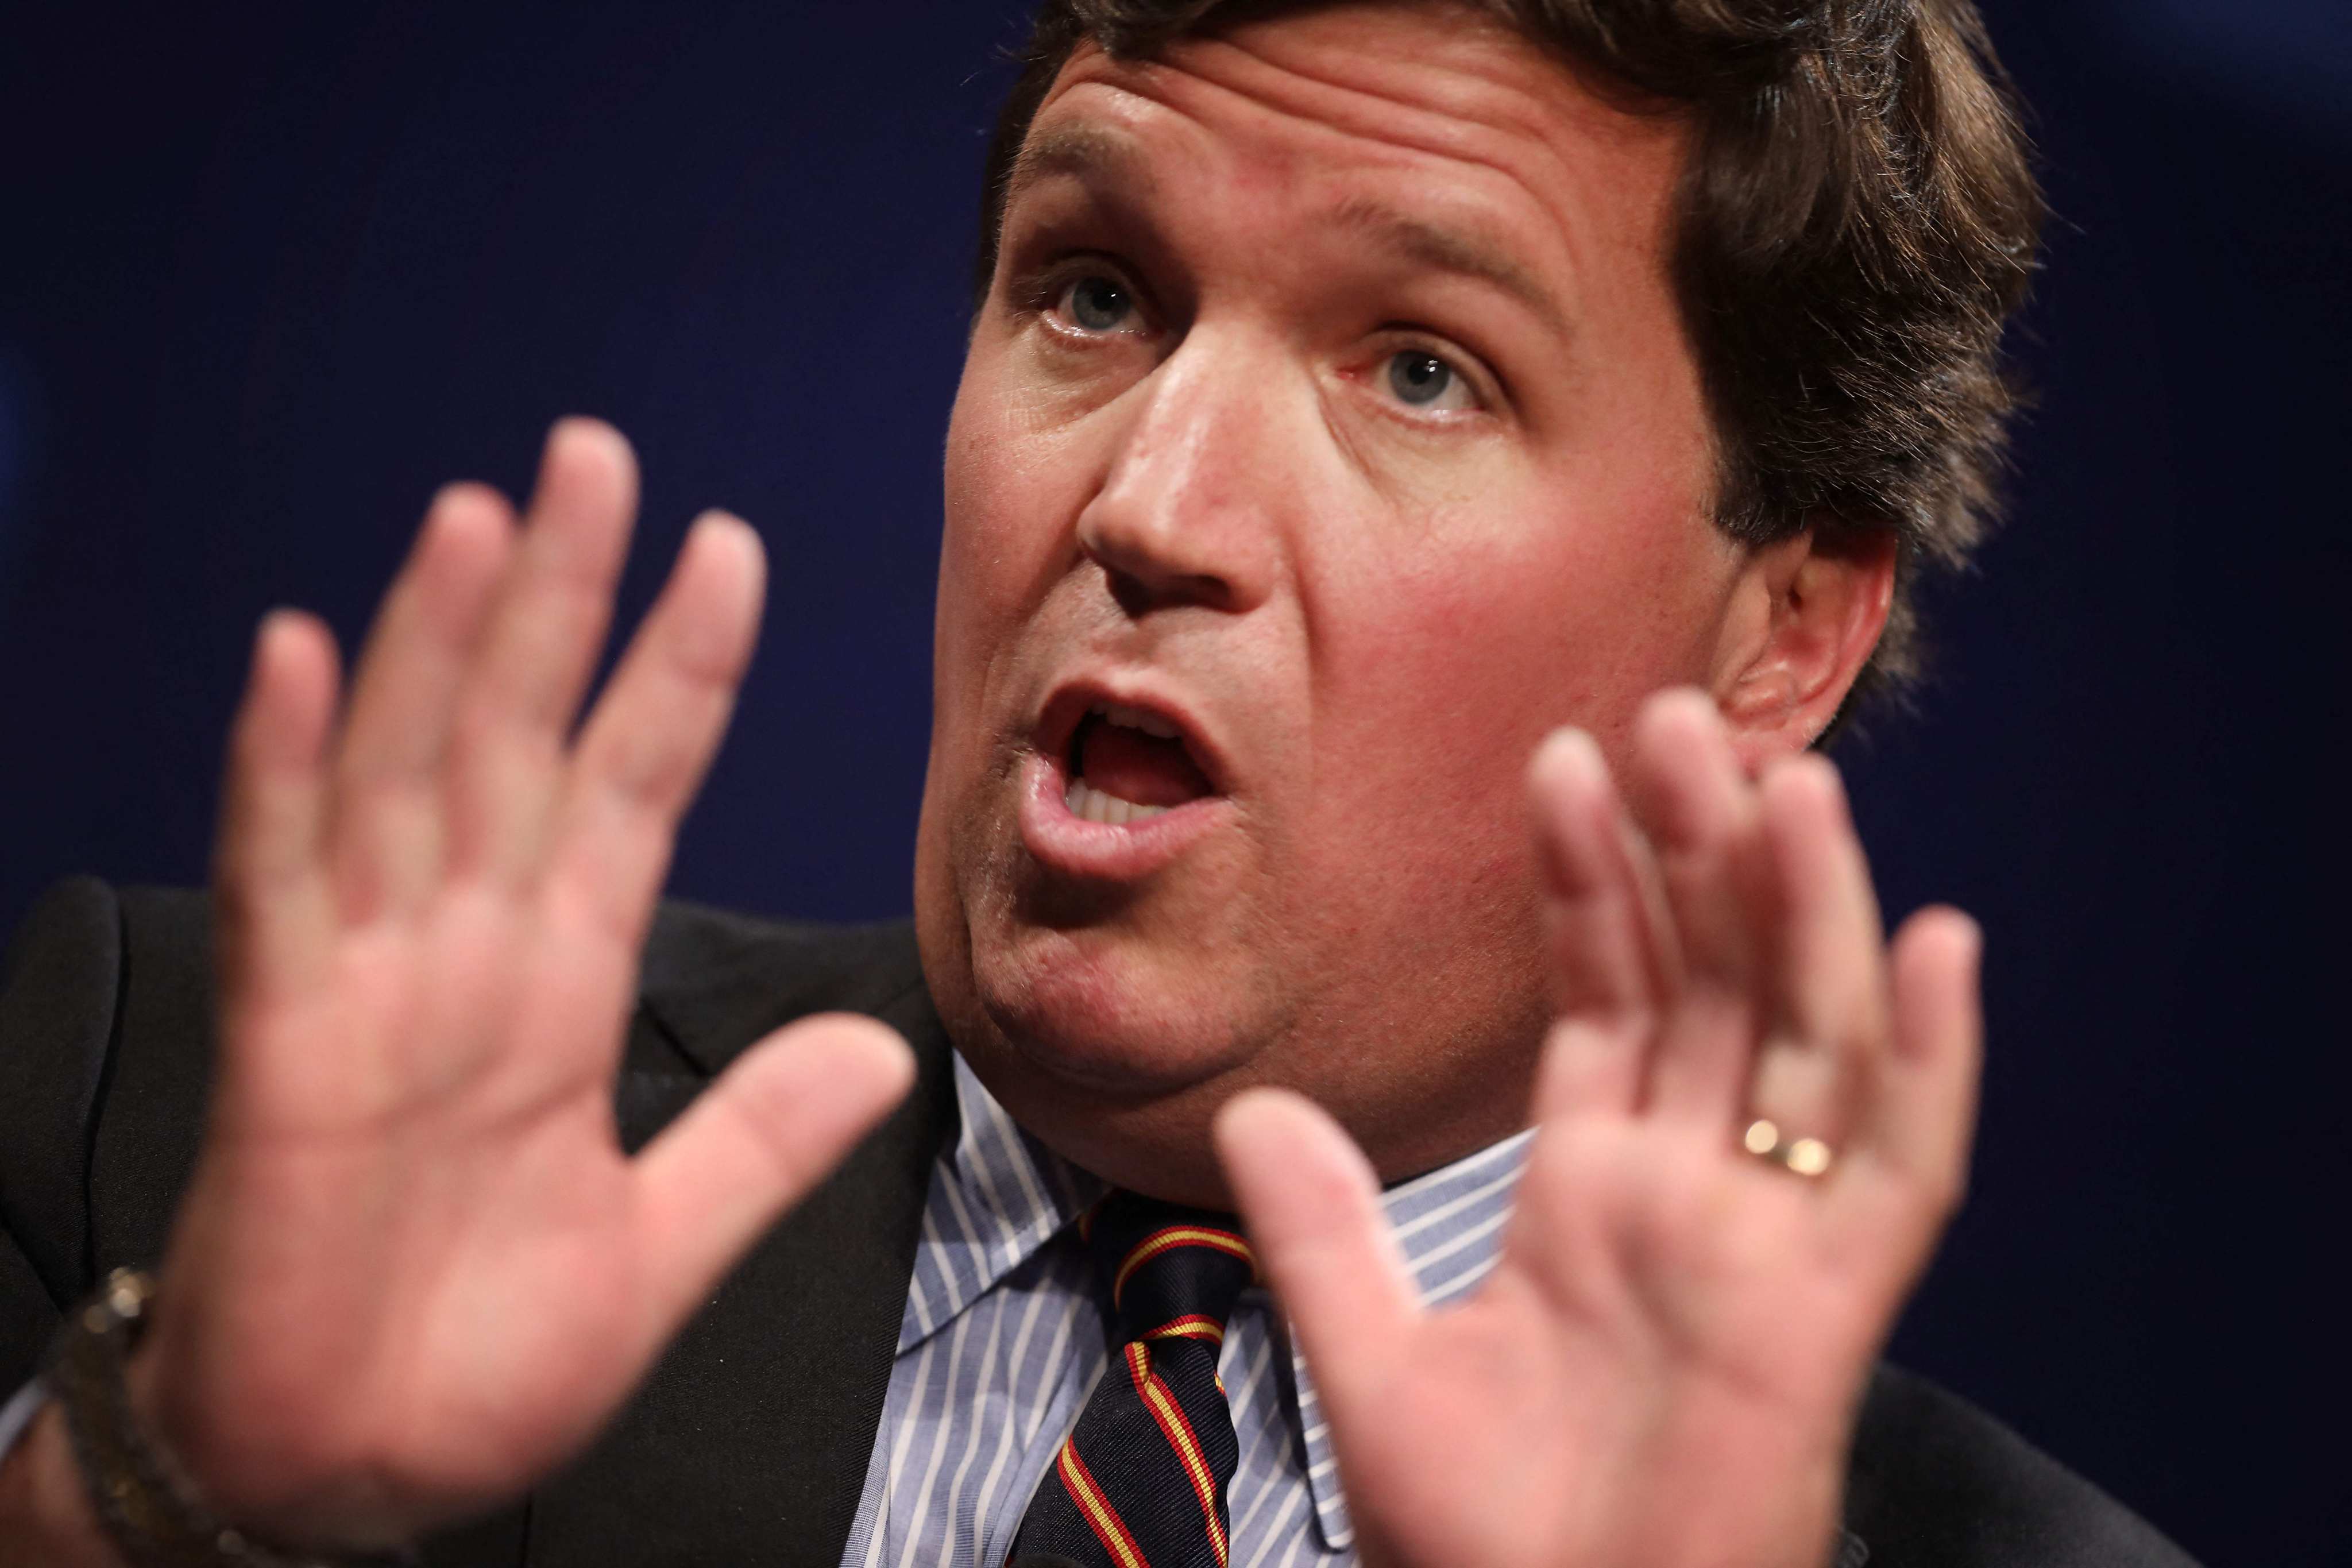 Fox News has ousted Tucker Carlson, its most popular host. File photo: AFP